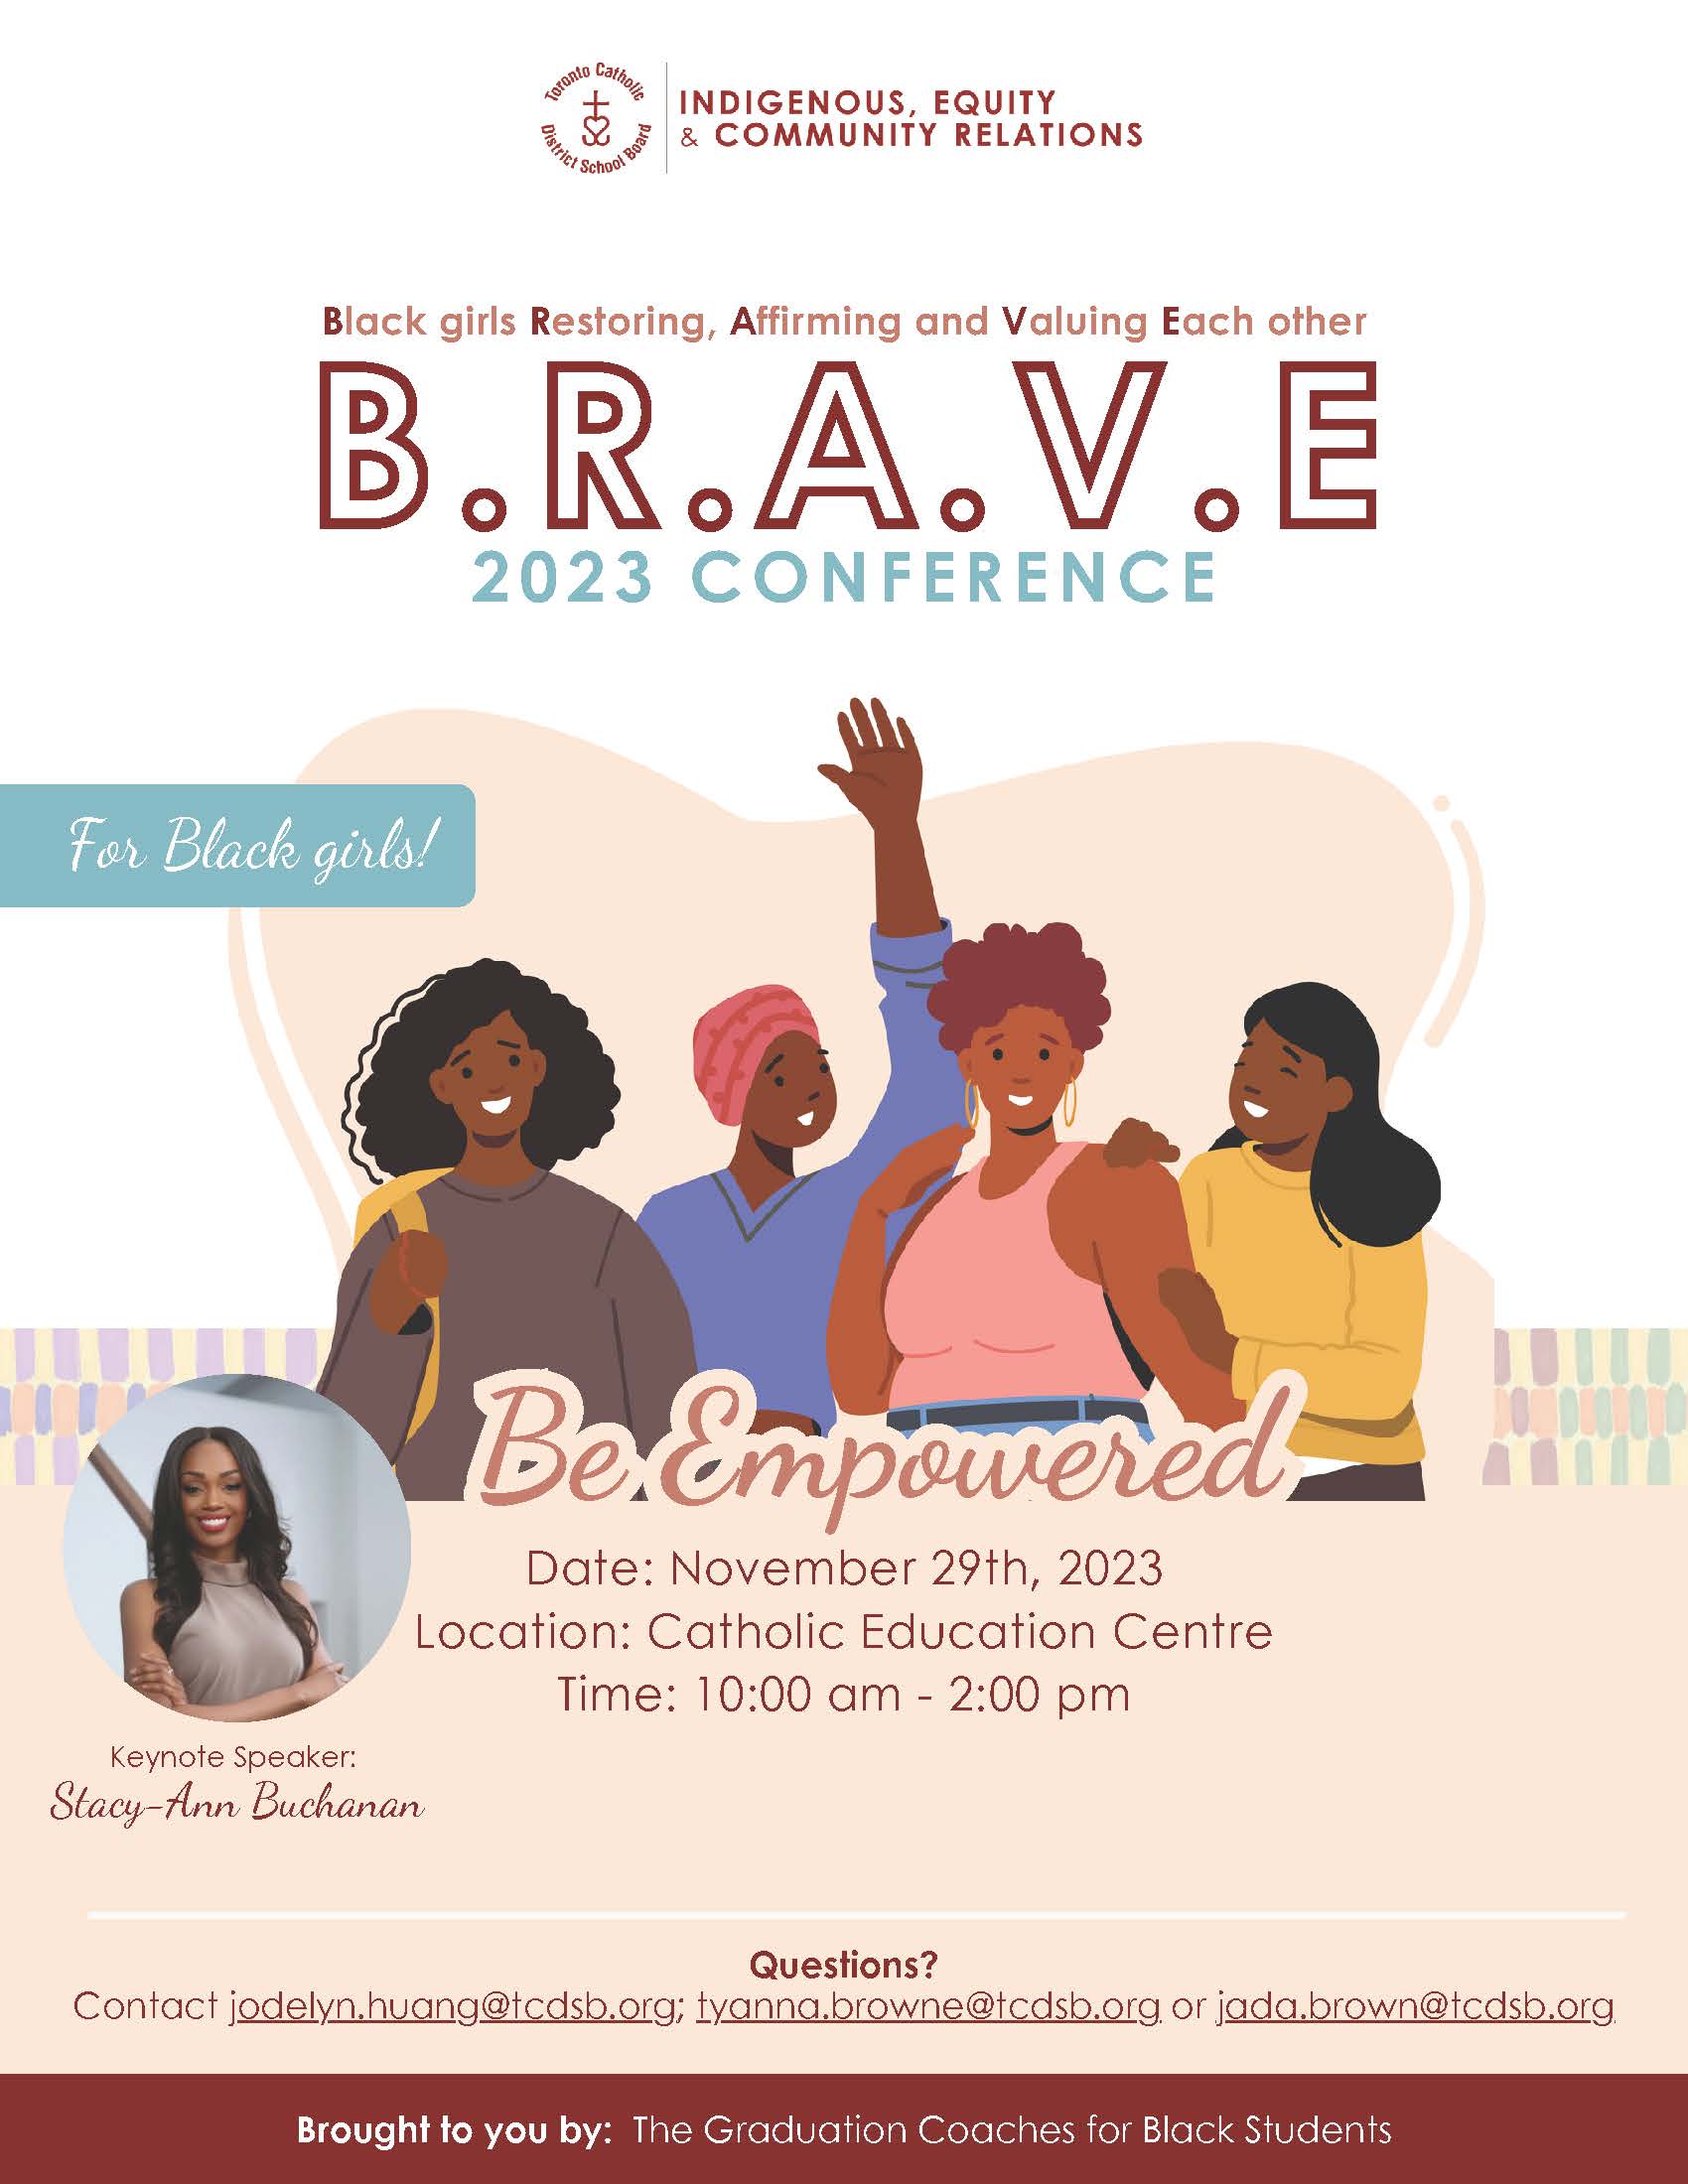 Brave Conference 2023 flyer - The Indigenous, Equity & Community Relations logo is at the top of the flyer. The main text says Black girls Restoring Affirming and Valuing Each Other - BRAVE 2023 Conference - For Black girls! There is a clip artwork of four Black girls smiling together, with the text "Be Empowered" over them. Date: November 29, 2023. Location: Catholic Education Centre. Time: 10 am to 2 pm. Questions? Contact jodelyn.huang@tcdsb.org, tyanna.brown@tcdsb.org or jada.brown@tcdsb.org. Brought to you by: The Graduation Coaches for Black Students.